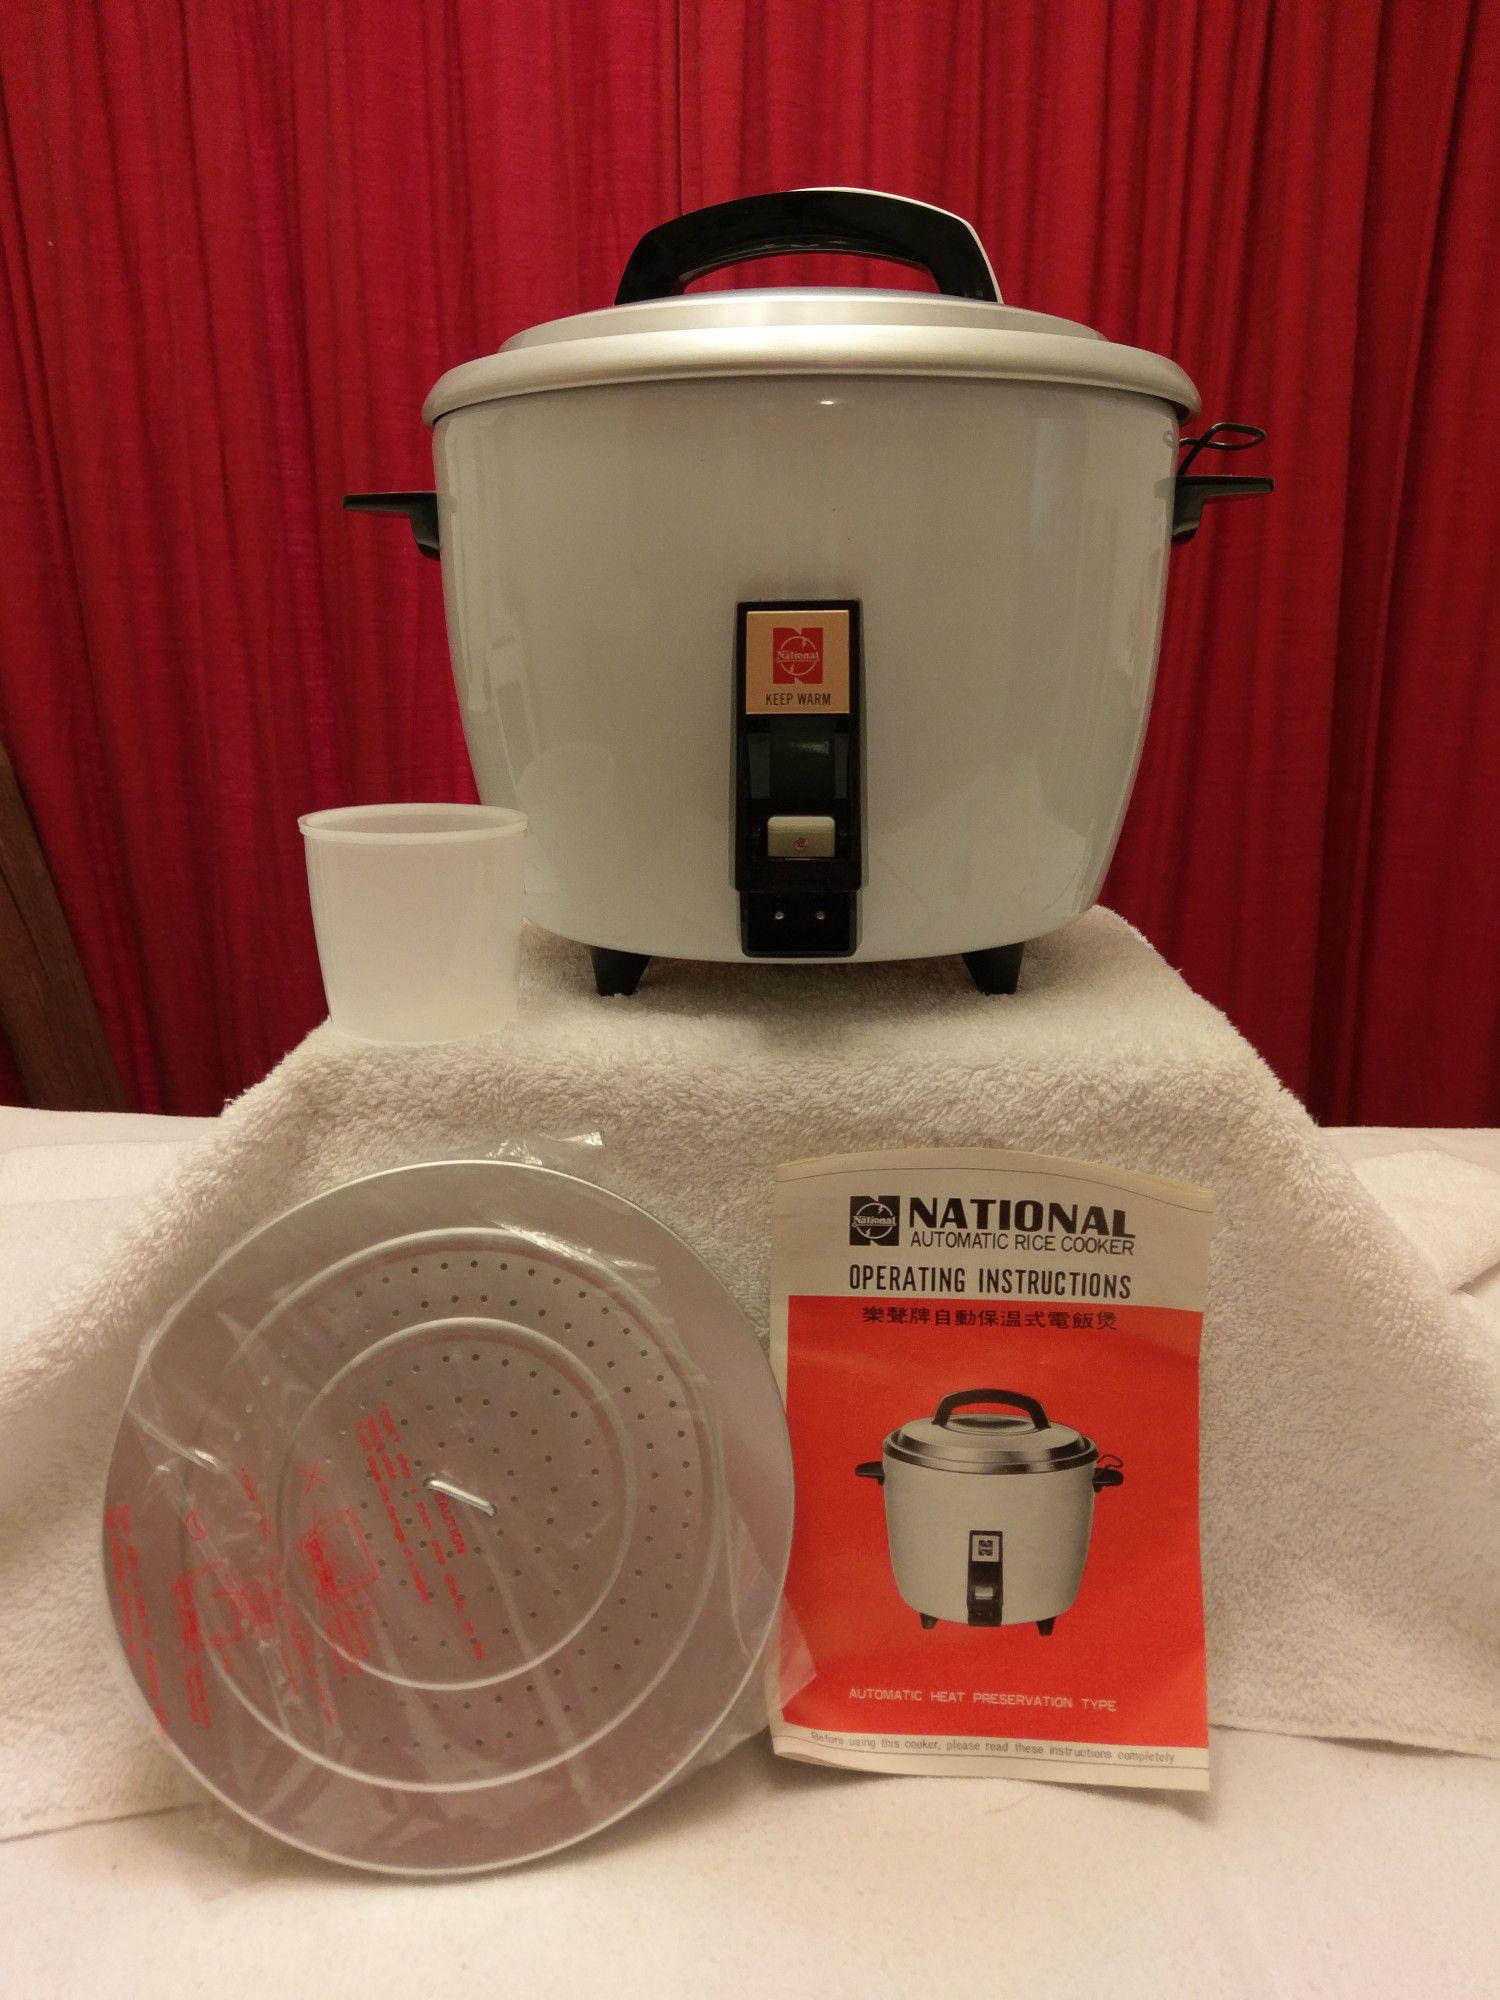 Aroma Digital Rice Cooker, Food Steamer, Small, 4 Cup Uncooked) for Sale in  Tempe, AZ - OfferUp